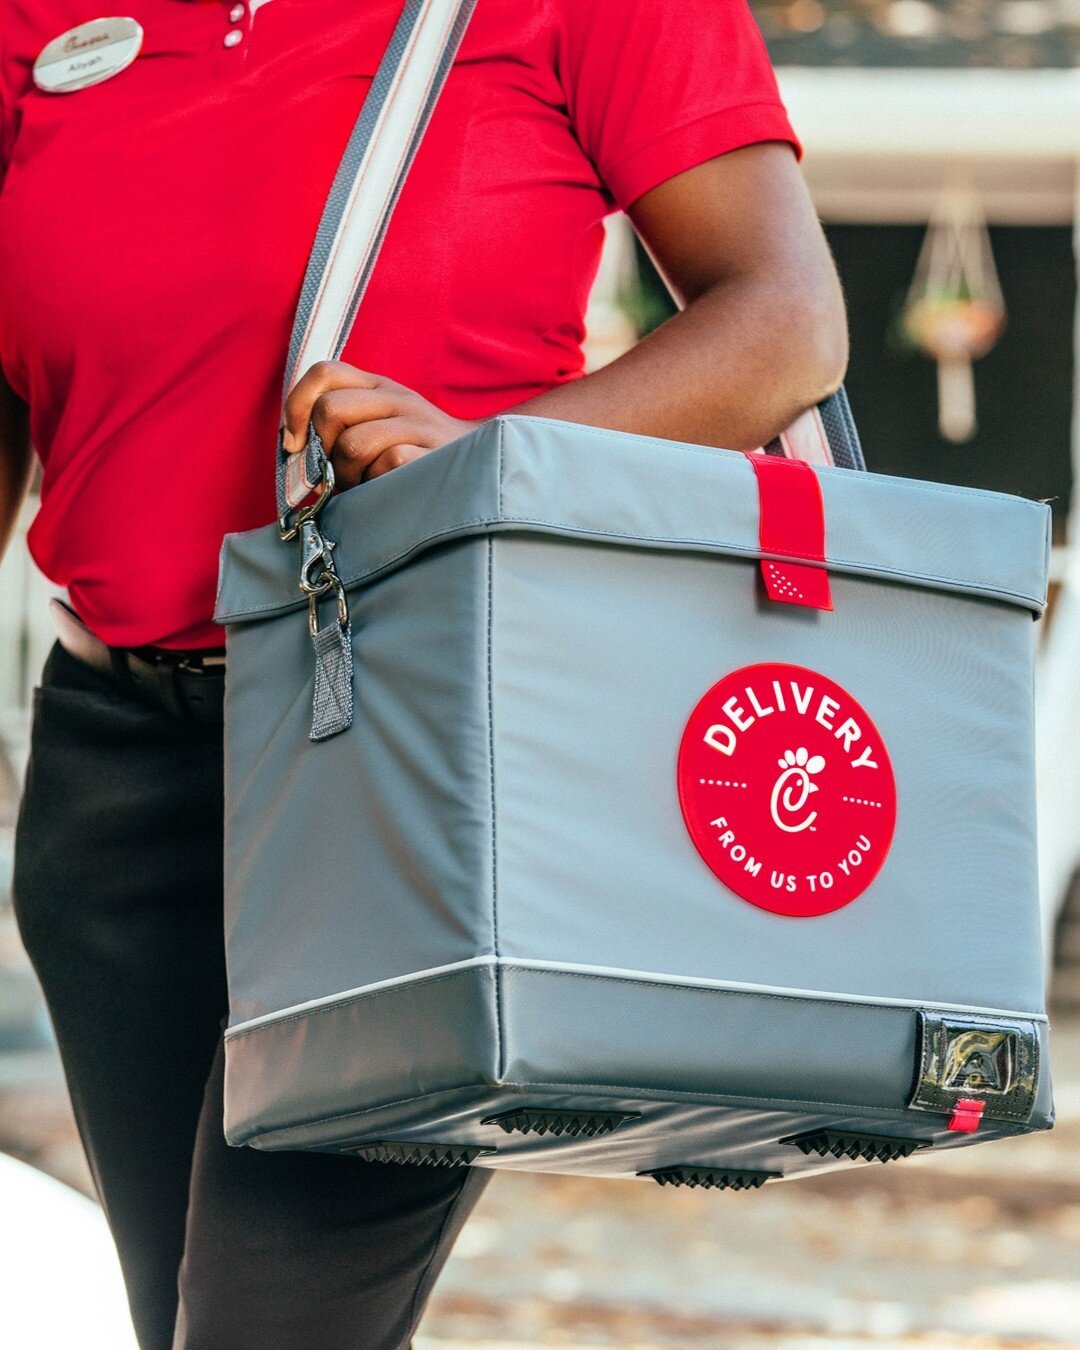 Enjoy the delicious and crispy taste of Chick-fil-A, delivered fresh to your doorstep. Simply open the app, select your favorite meal, and relax while we bring lunch to you.